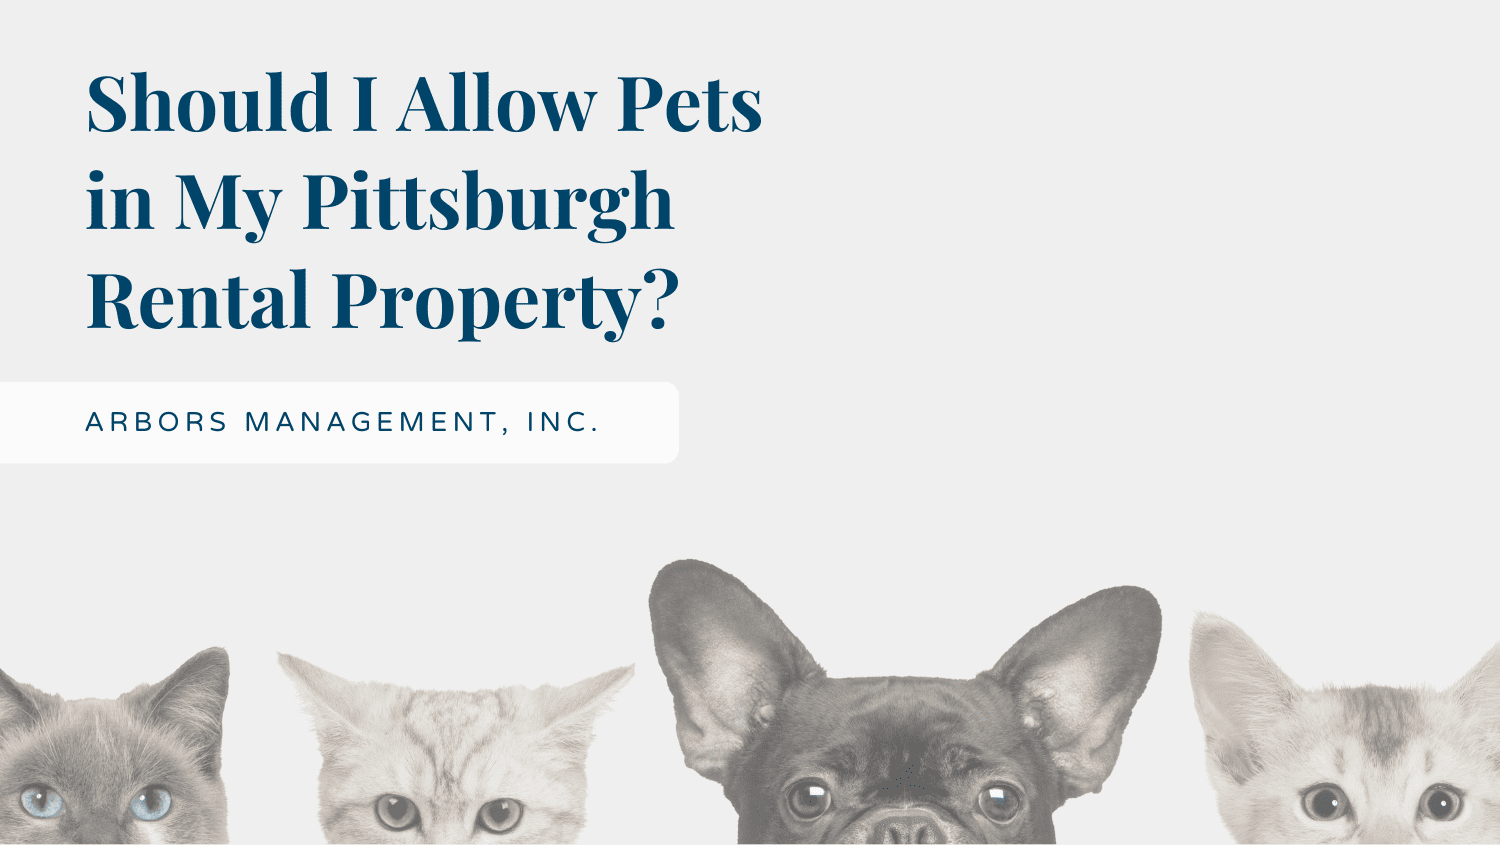 Should I Allow Pets in My Pittsburgh Property?